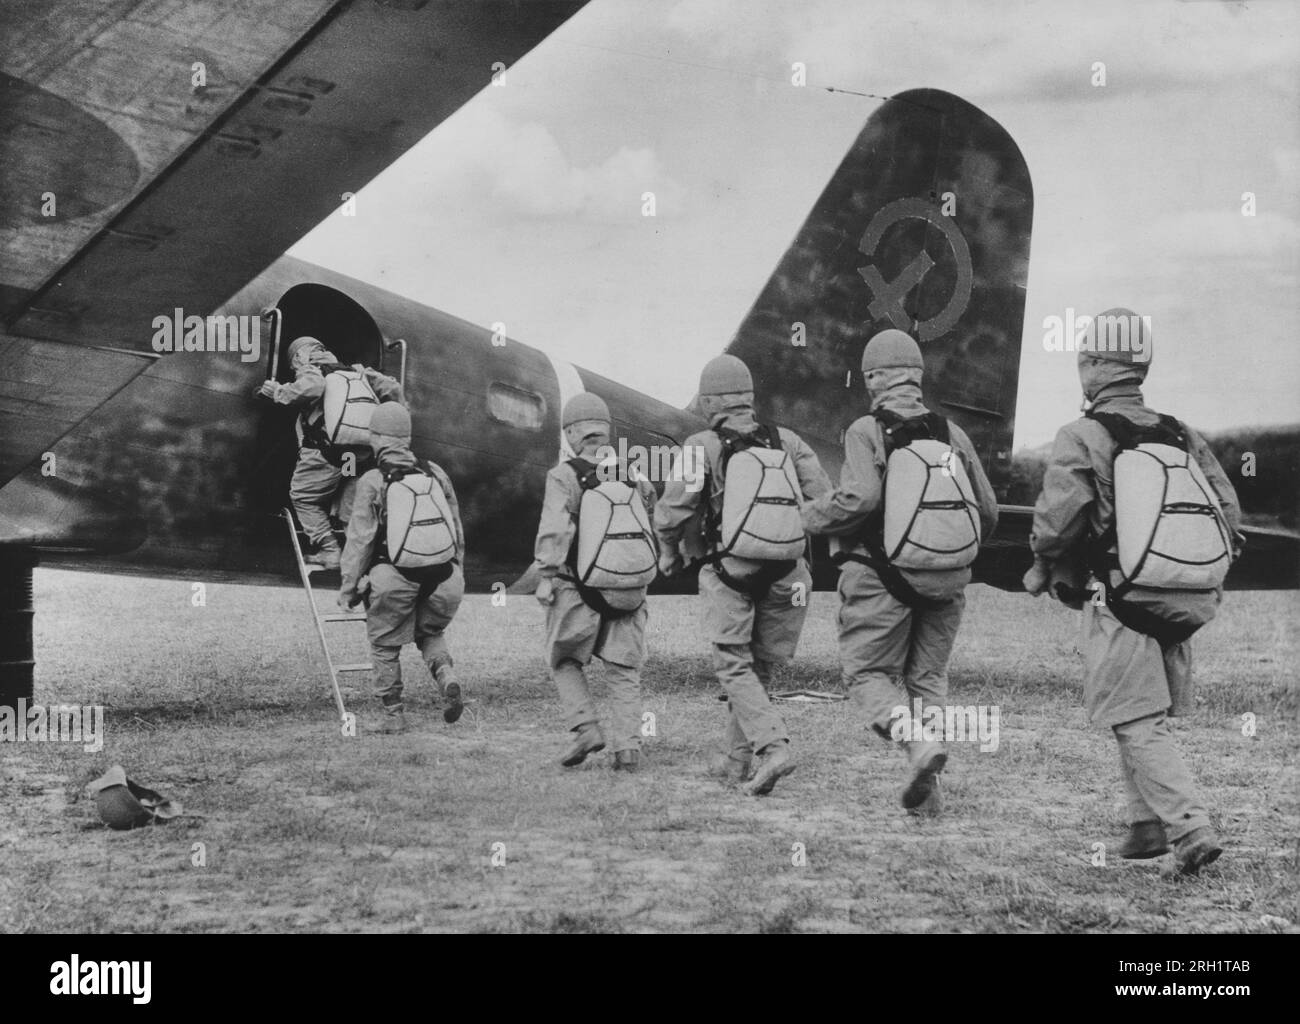 Battle of Palembang, February 13-15 1942. Airborne troops of the Imperial Japanese Army’s ‘Teishin Shudan’ (Raiding Group) board a Type 100 transport plane, February 1942. The Teishin Shudan would parachute onto Palembang on February 14 1942, where they engaged with KNIL forces and captured the oil fields and refineries in the area. Stock Photo